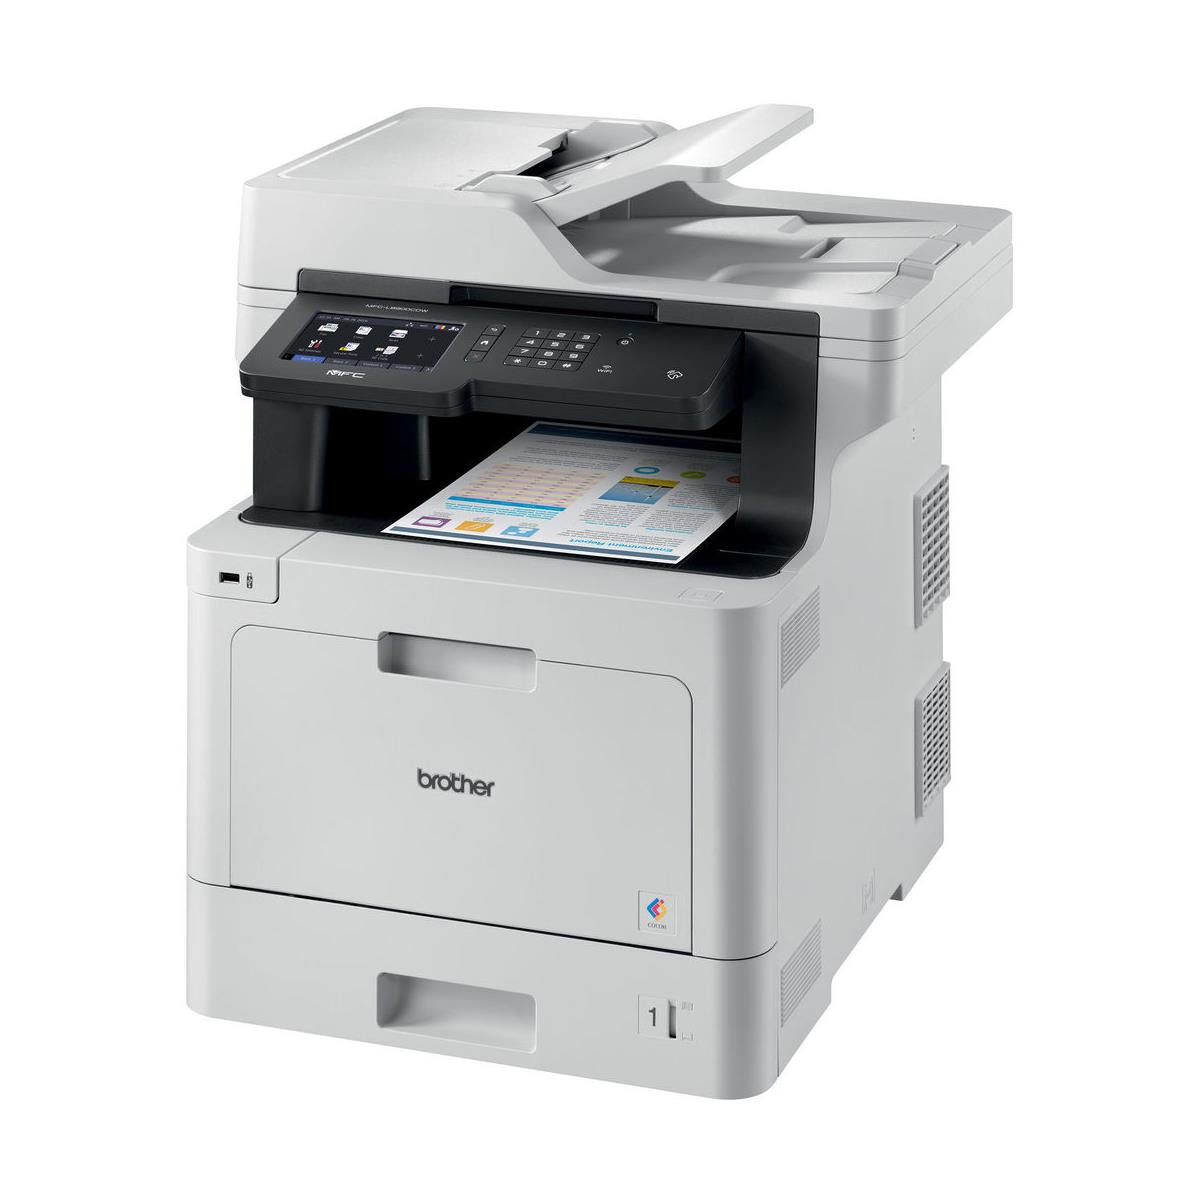 Image of Brother MFC-L8900CDW All-in-One Color Laser Printer